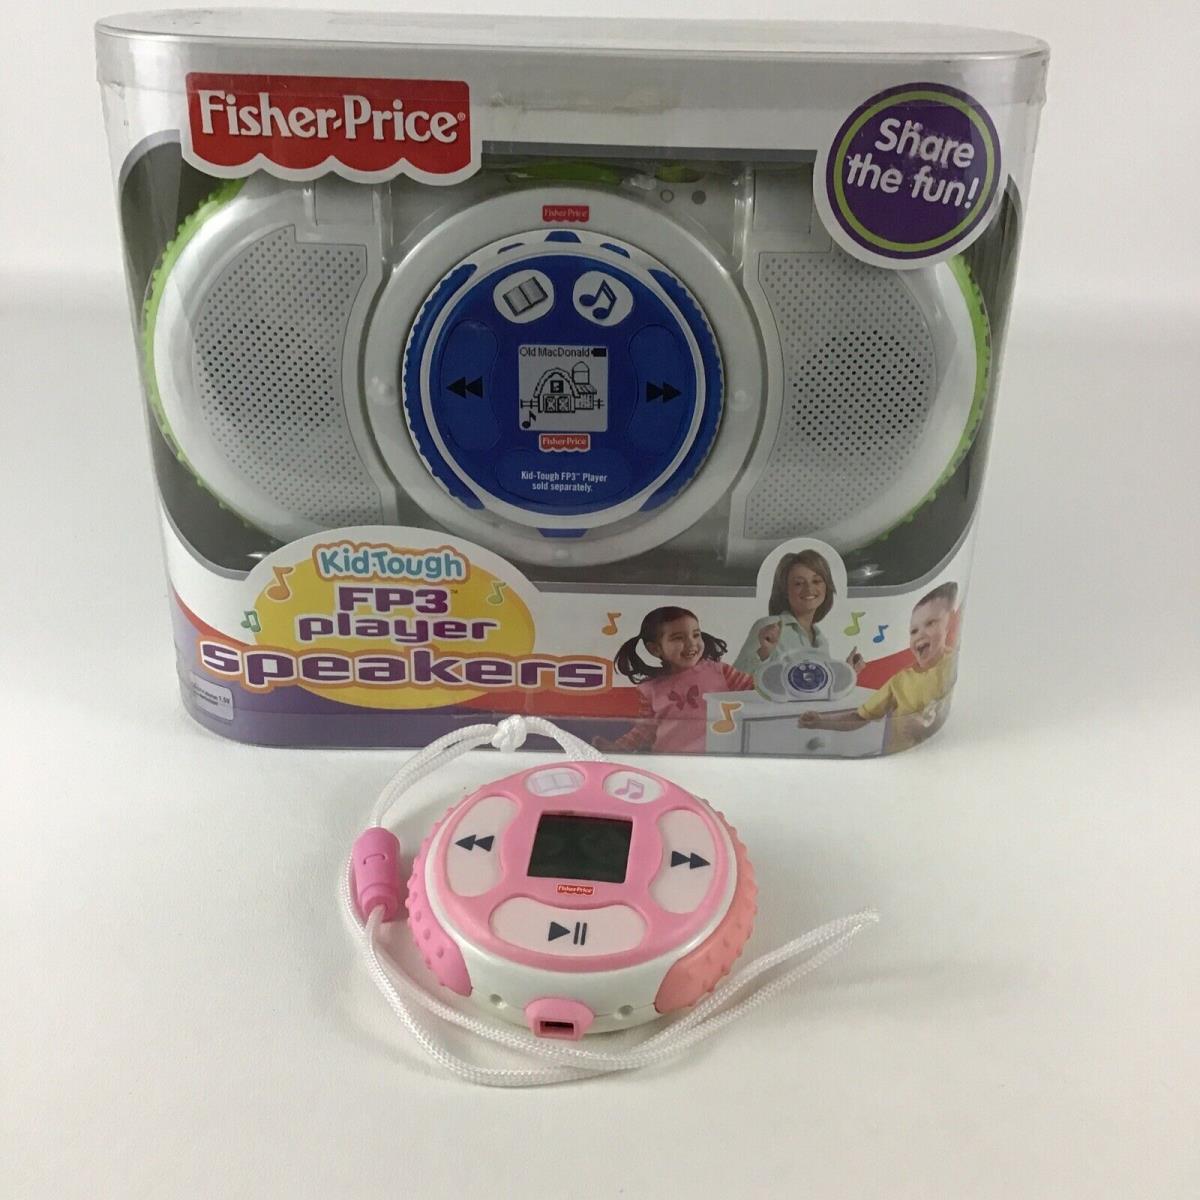 Fisher Price Kid Tough FP3 Player Speakers Portable Music Player Toy 2006